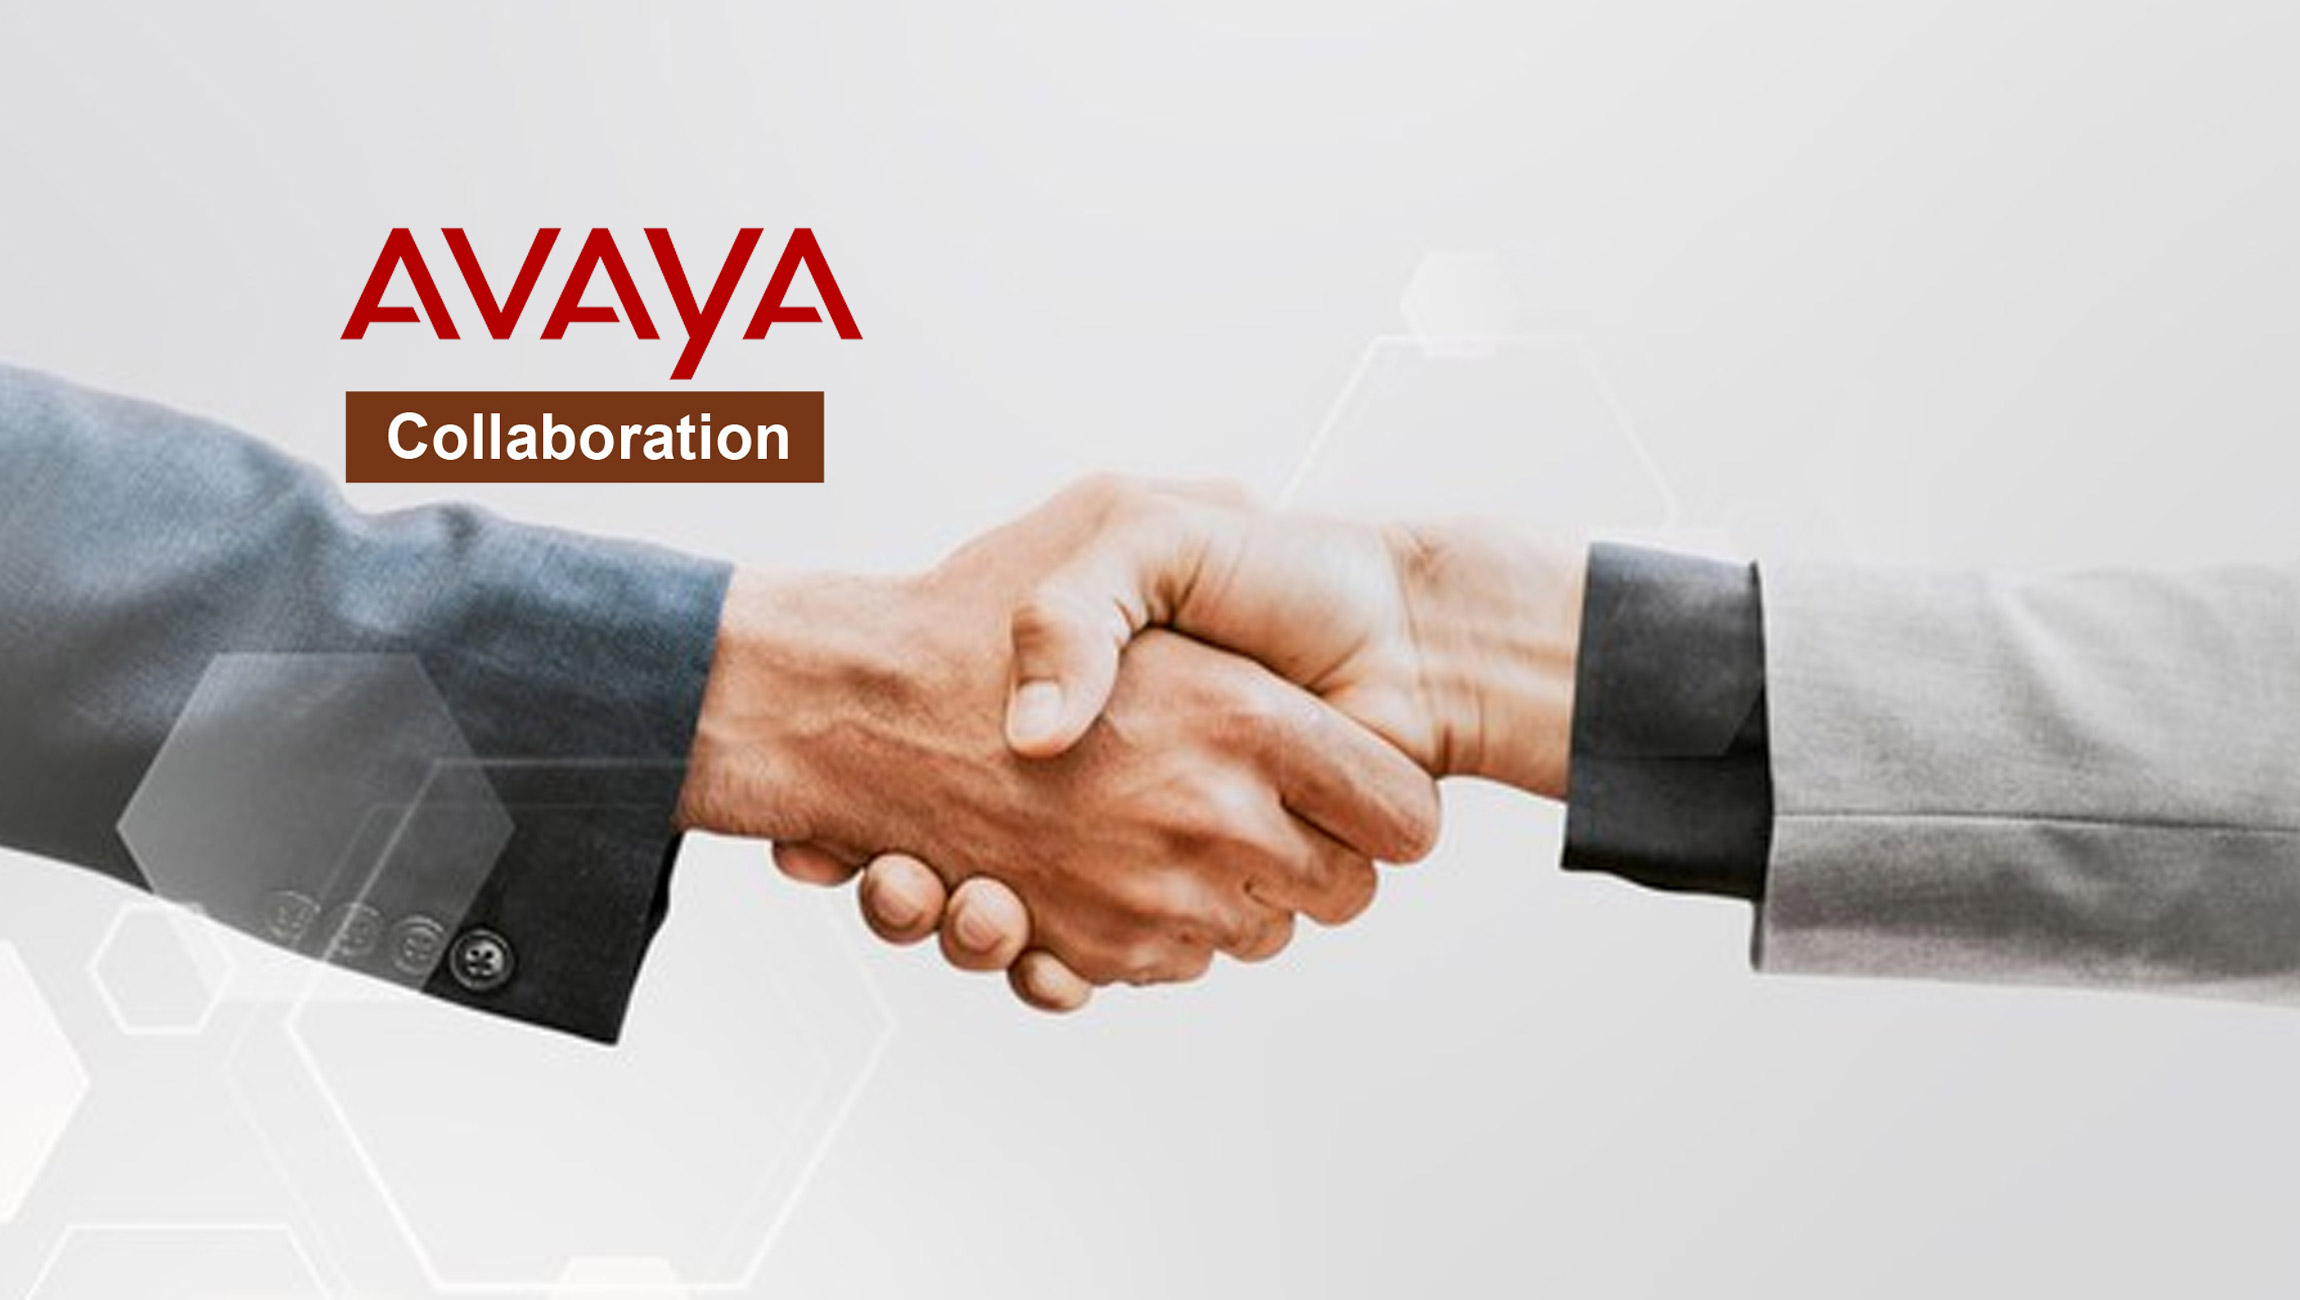 Avaya Edge Partner Program Earns CRN's 5-Star Designation for Advancing Growth and Positive Change for 15th Consecutive Year